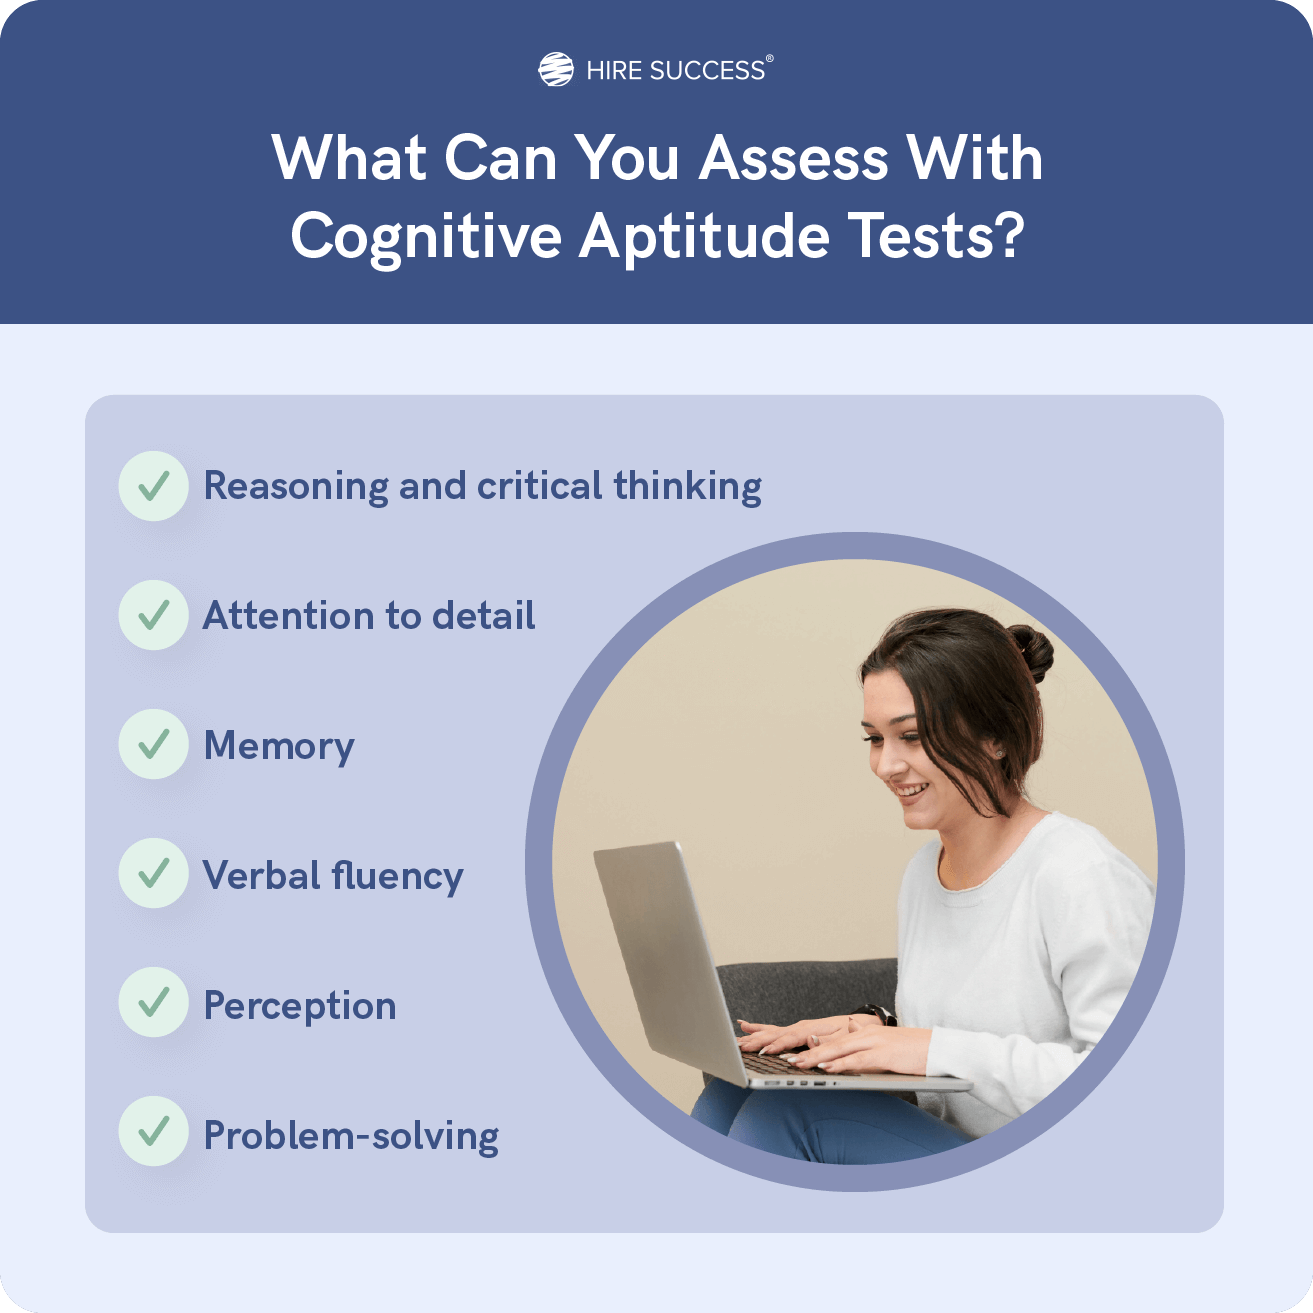 What can you assess with cognitive aptitude tests?